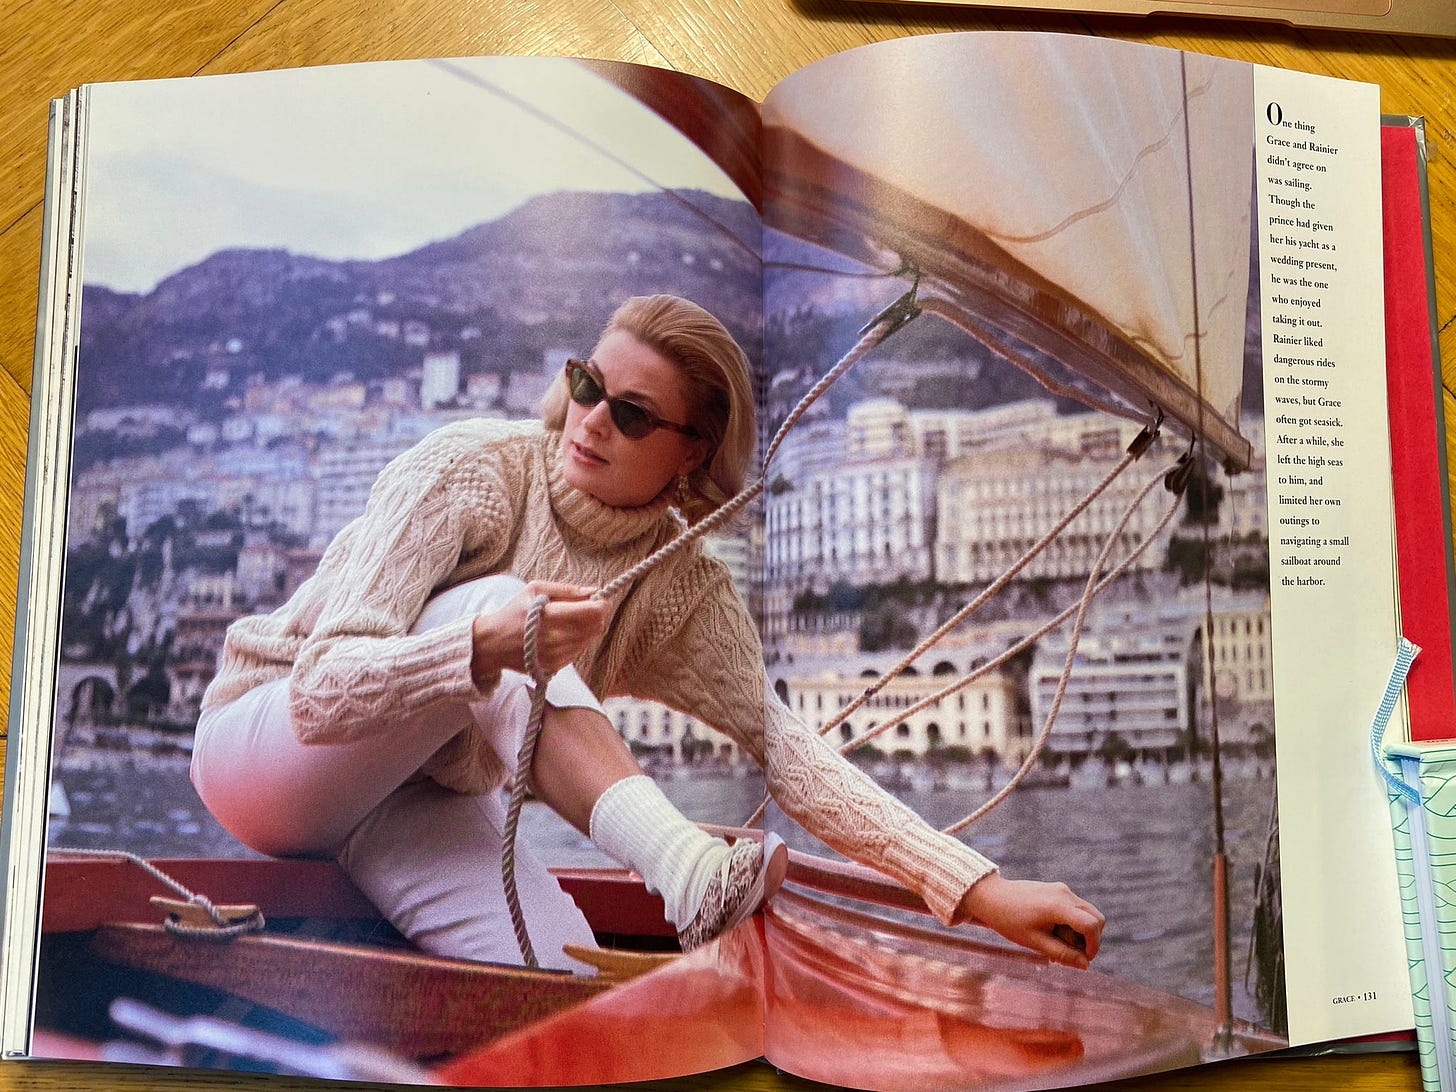 GRACE by Howell Conant opened to a page of Grace Kelly posing on a sailboat in an Aran sweater.